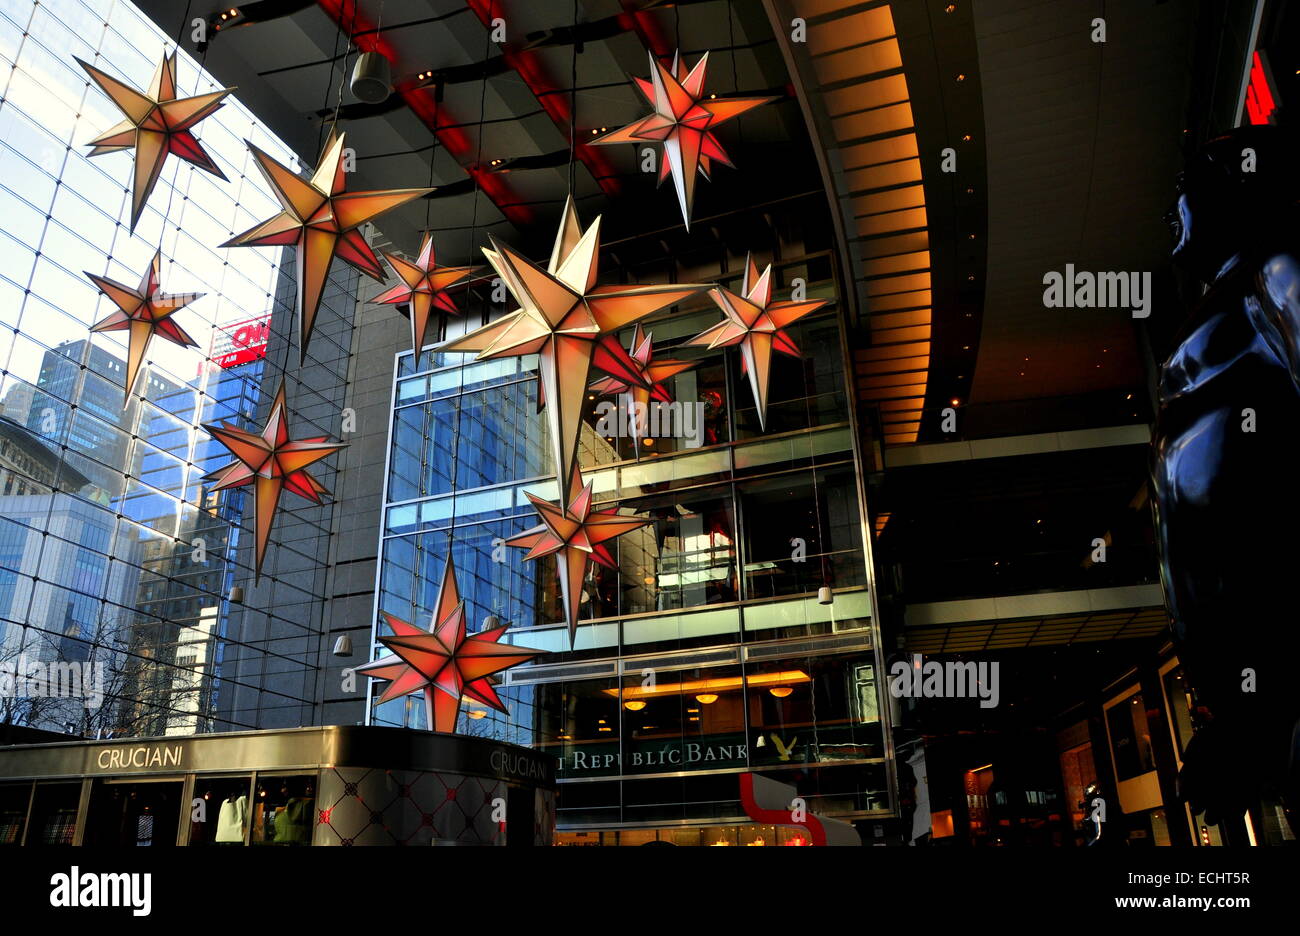 Nyc Dazzling Christmas Stars Hang From The Atrium Ceiling Of The